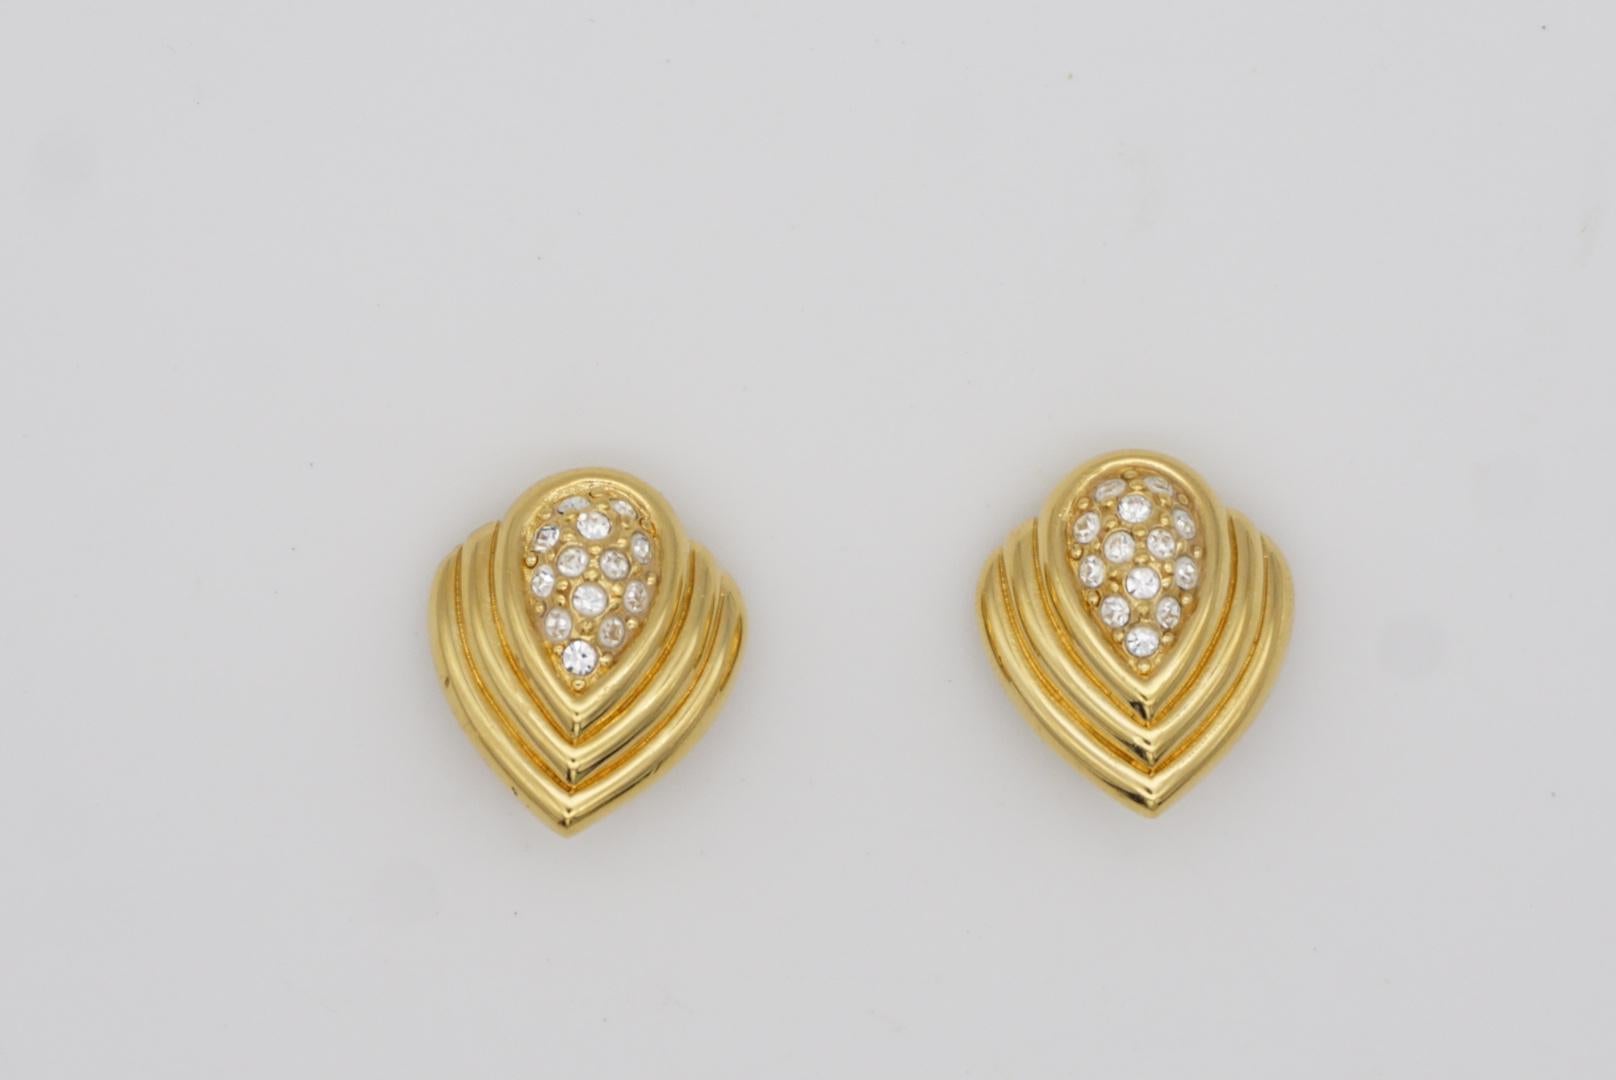 Christian Dior Vintage 1980s Oval Tear Water Drop Crystals Gold Clip Earrings In Excellent Condition For Sale In Wokingham, England